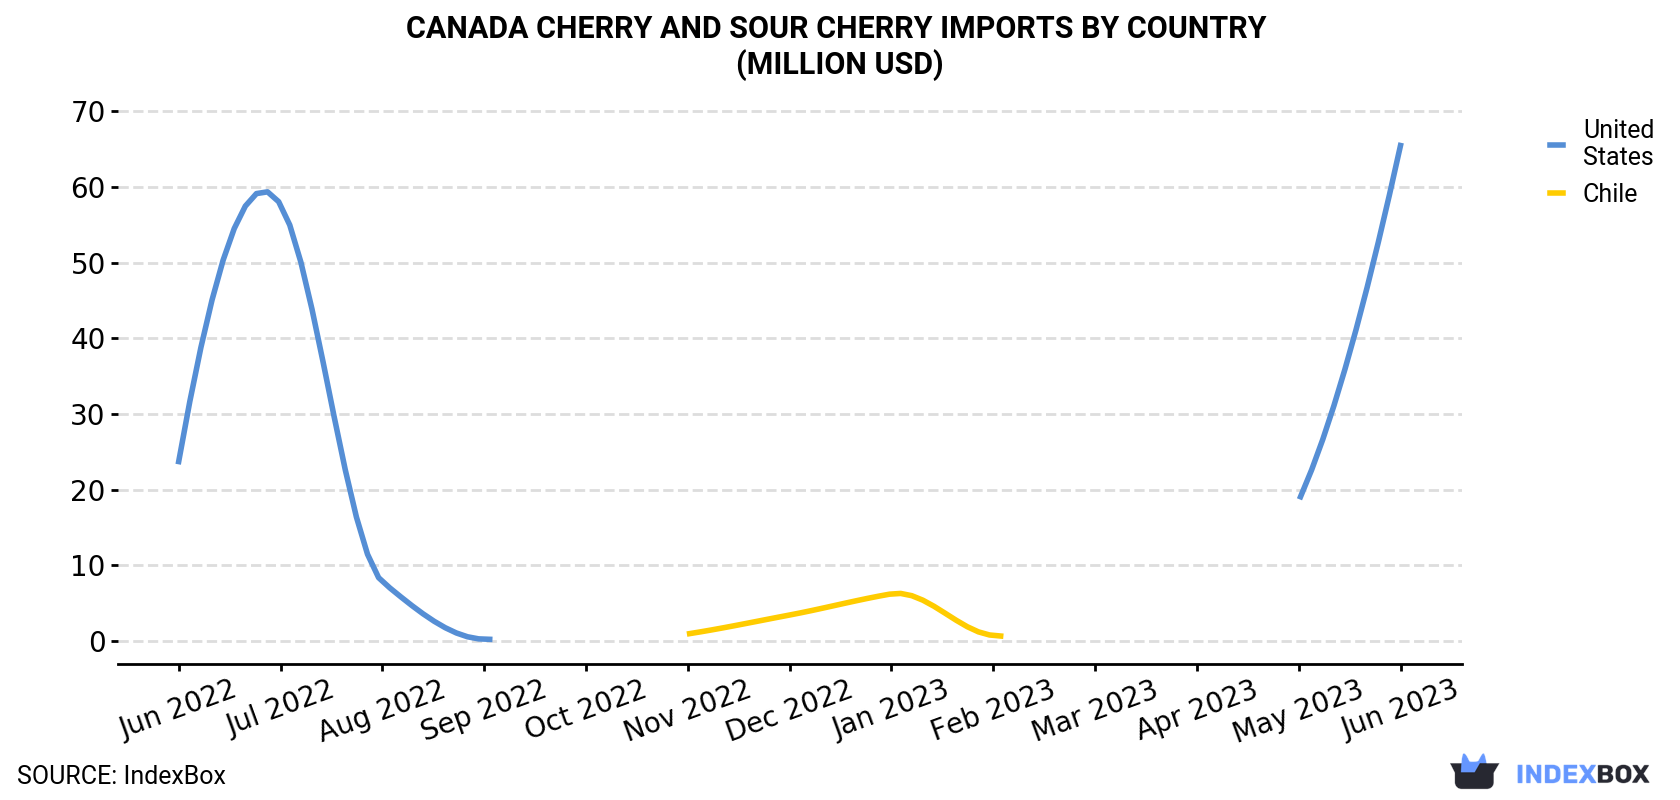 Canada Cherry and Sour Cherry Imports By Country (Million USD)